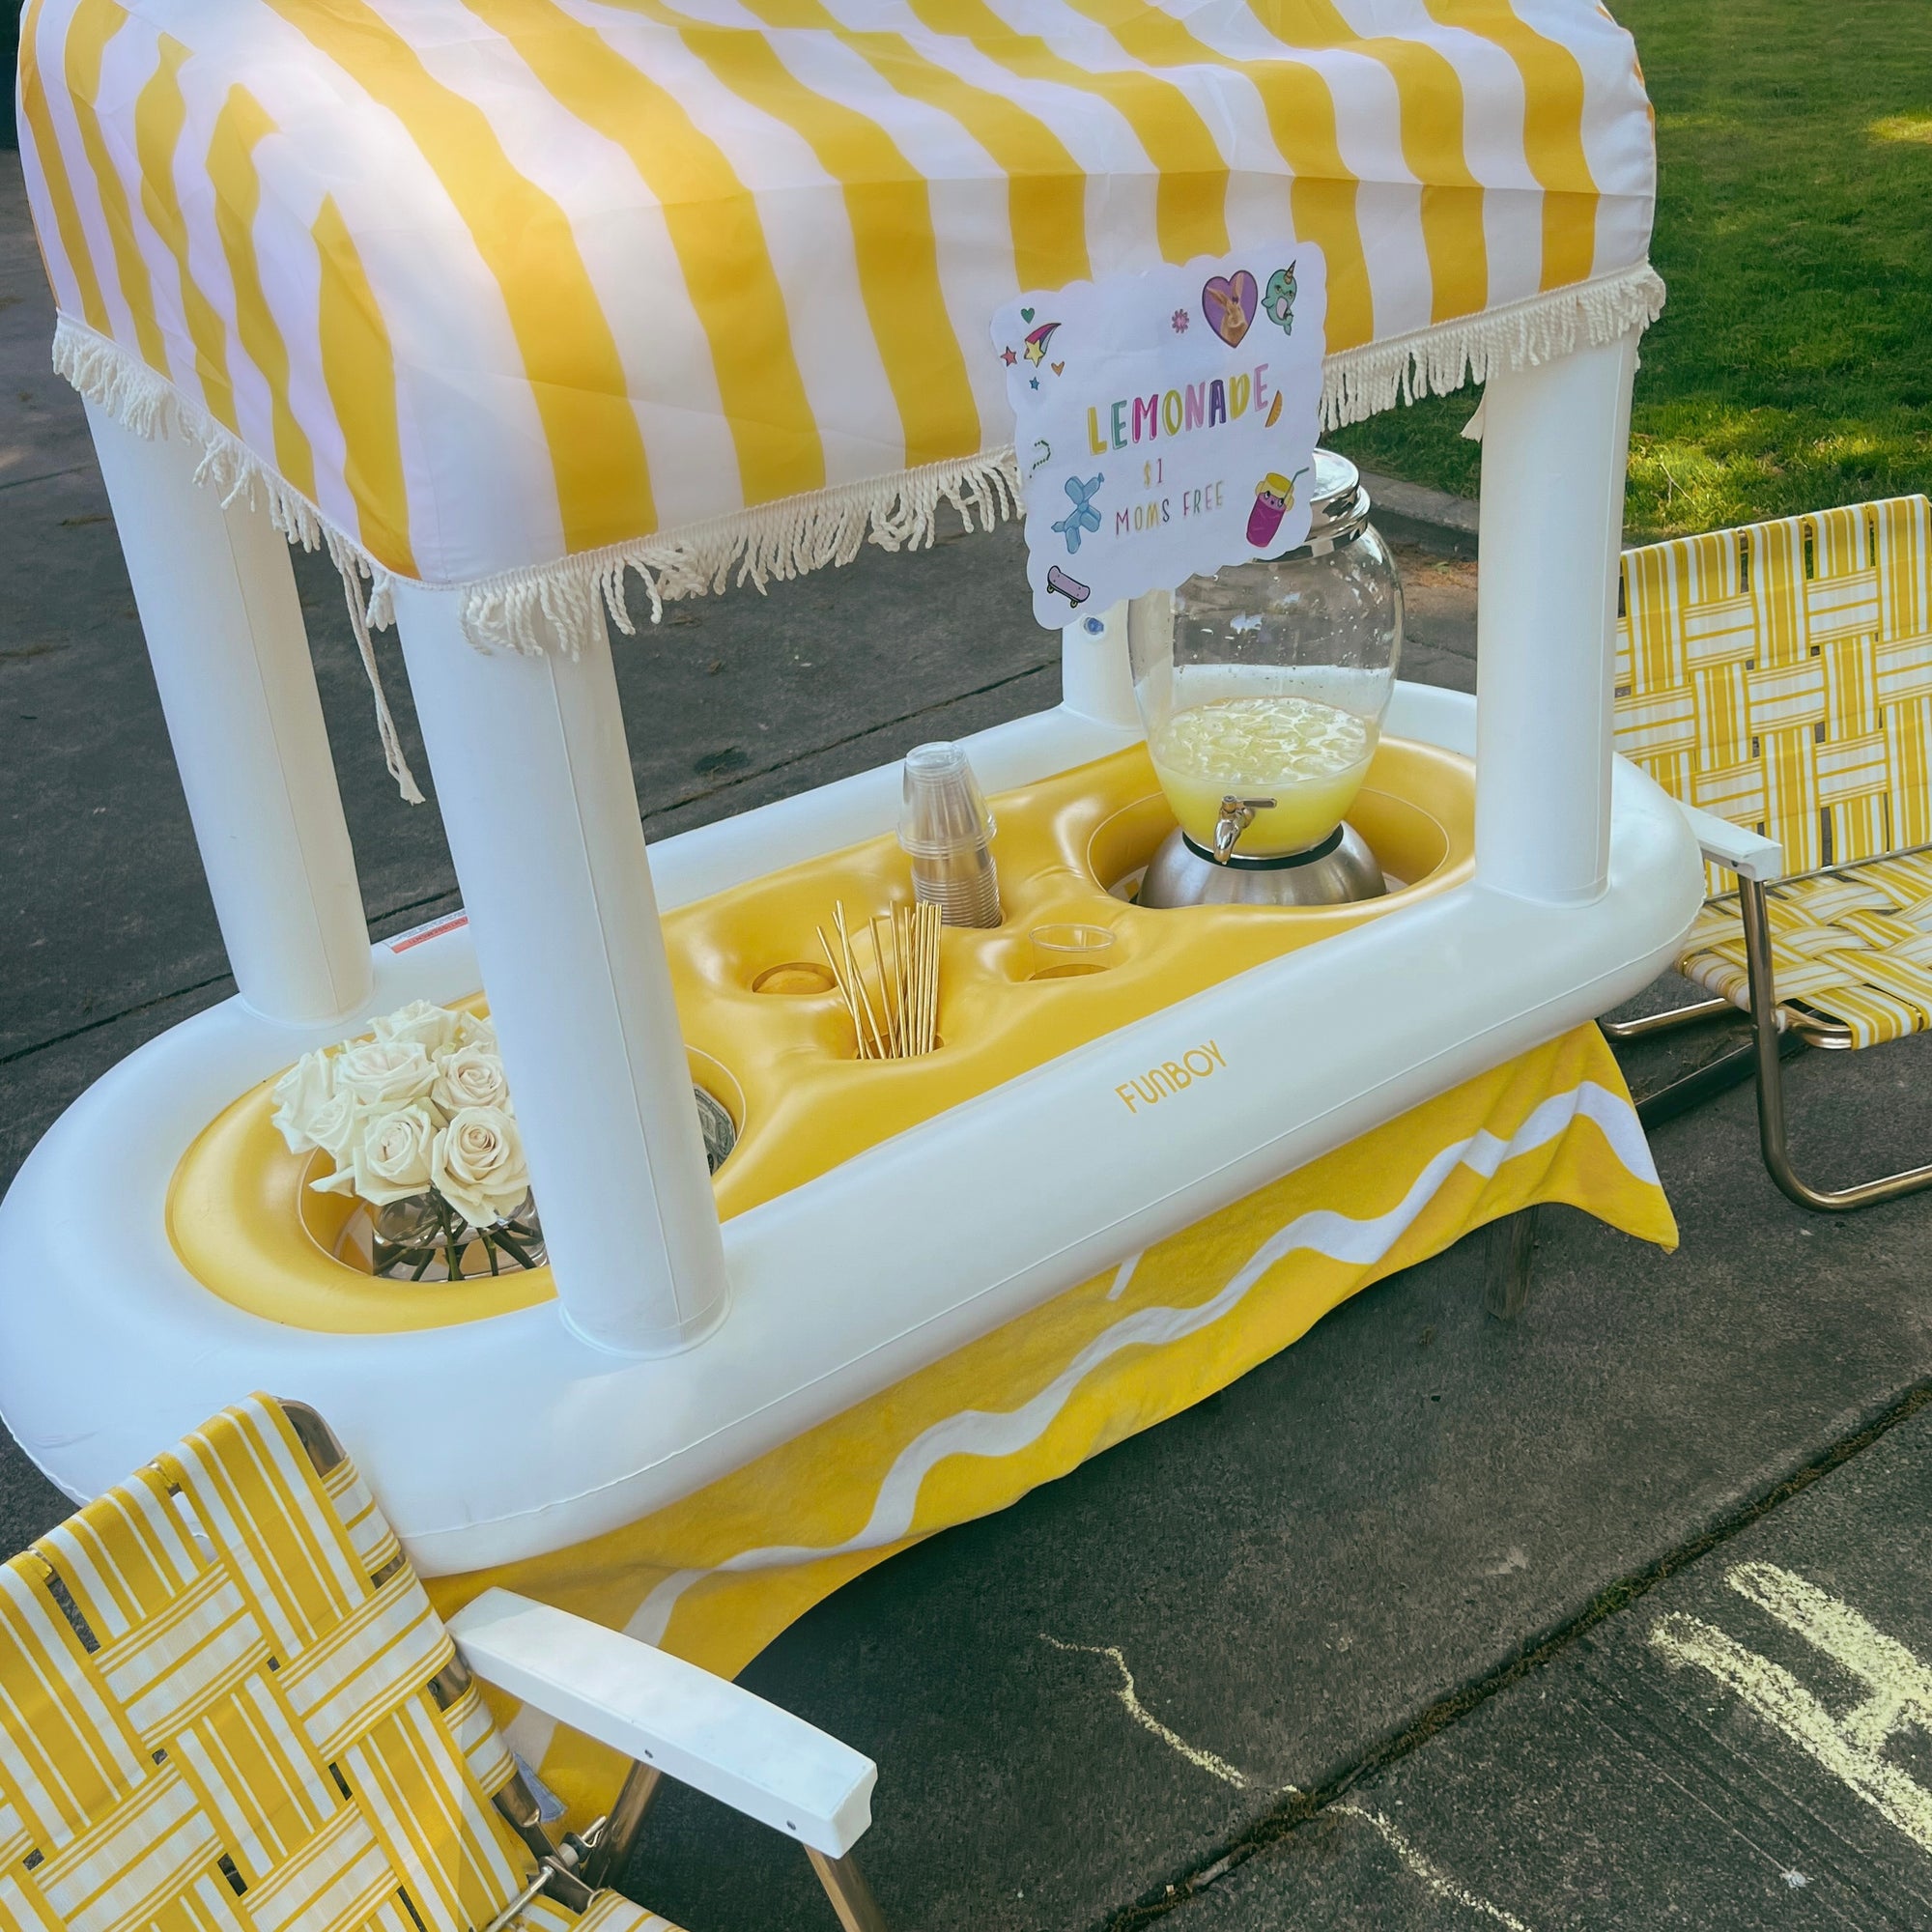 10 Awesome Ideas for Lemonade Stands